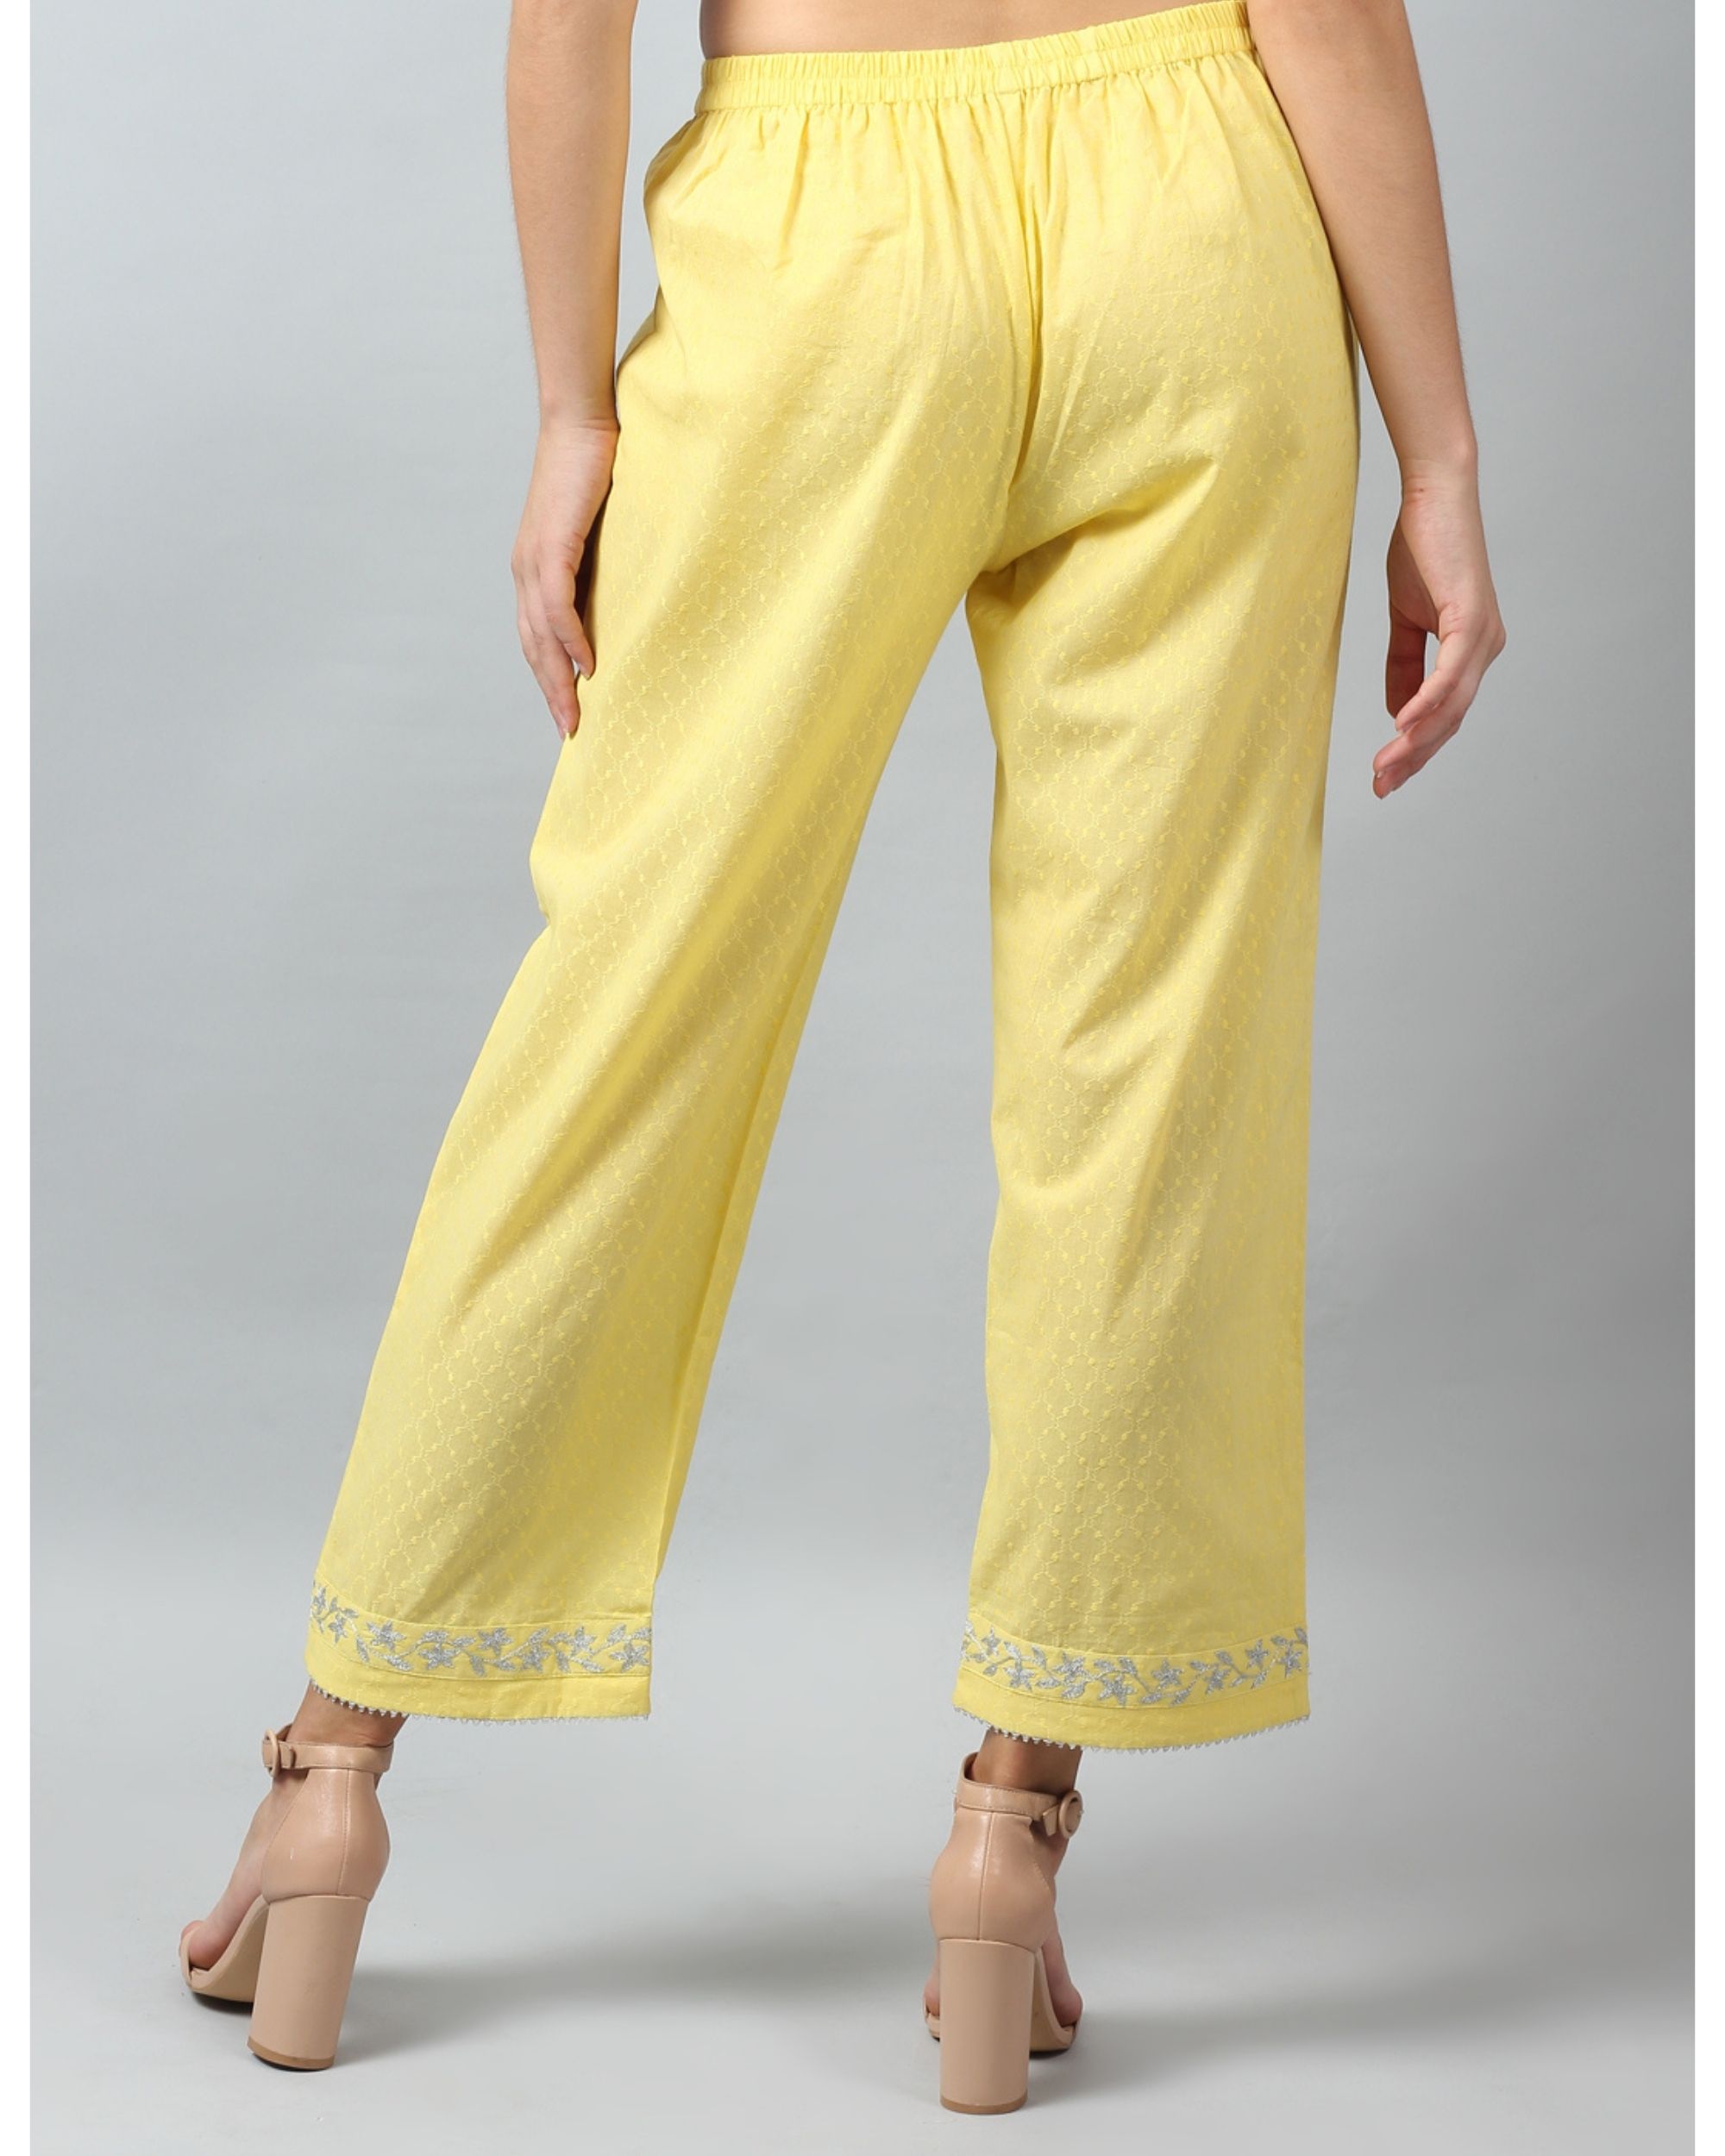 Light yellow embroidered pants by D'ART STUDIO | The Secret Label